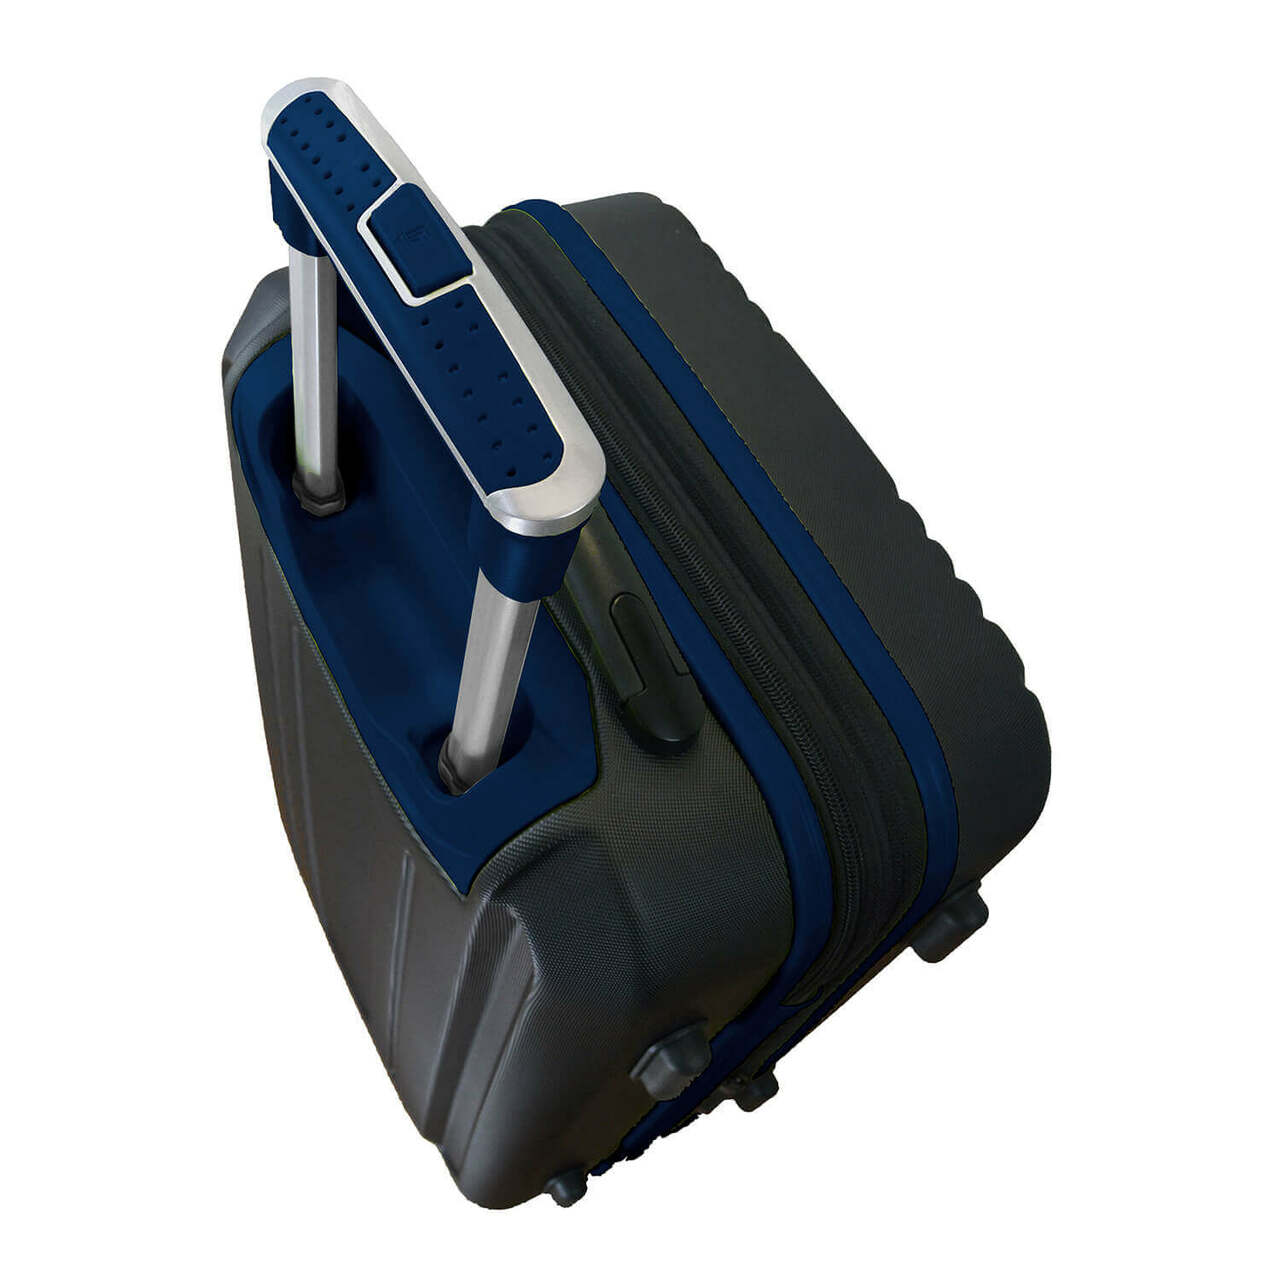 West Virginia Carry On Spinner Luggage | West Virginia Hardcase Two-Tone Luggage Carry-on Spinner in Navy